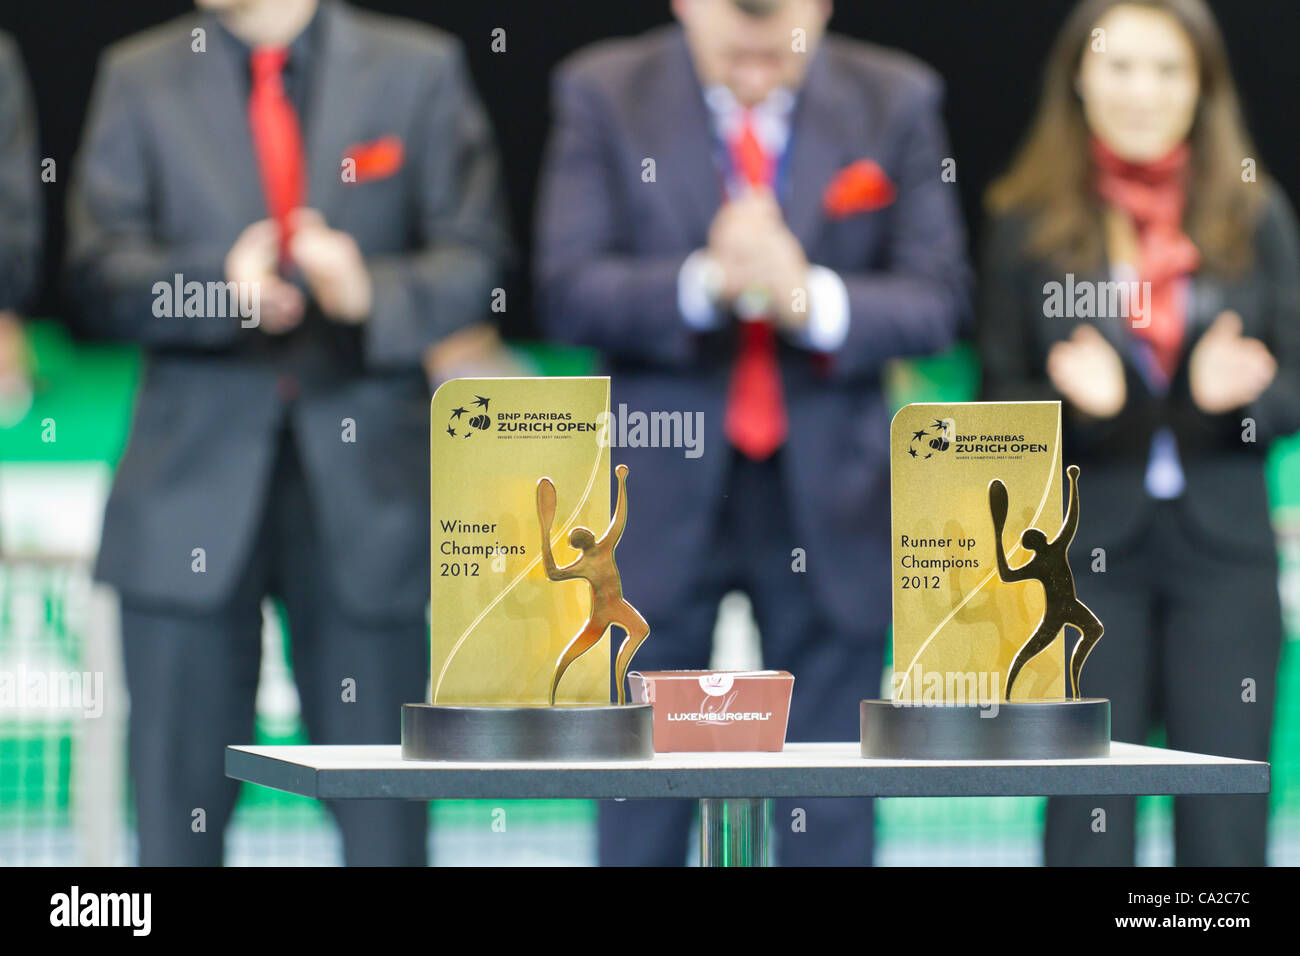 ZURICH, SWITZERLAND-MARCH 24: Trophy Ceremony for Carlos Moya and Stefan Edberg at BNP Paribas Open Champions Tour  in Zurich, SUI on March 24, 2012.  Moya won for medical reasons. Stock Photo